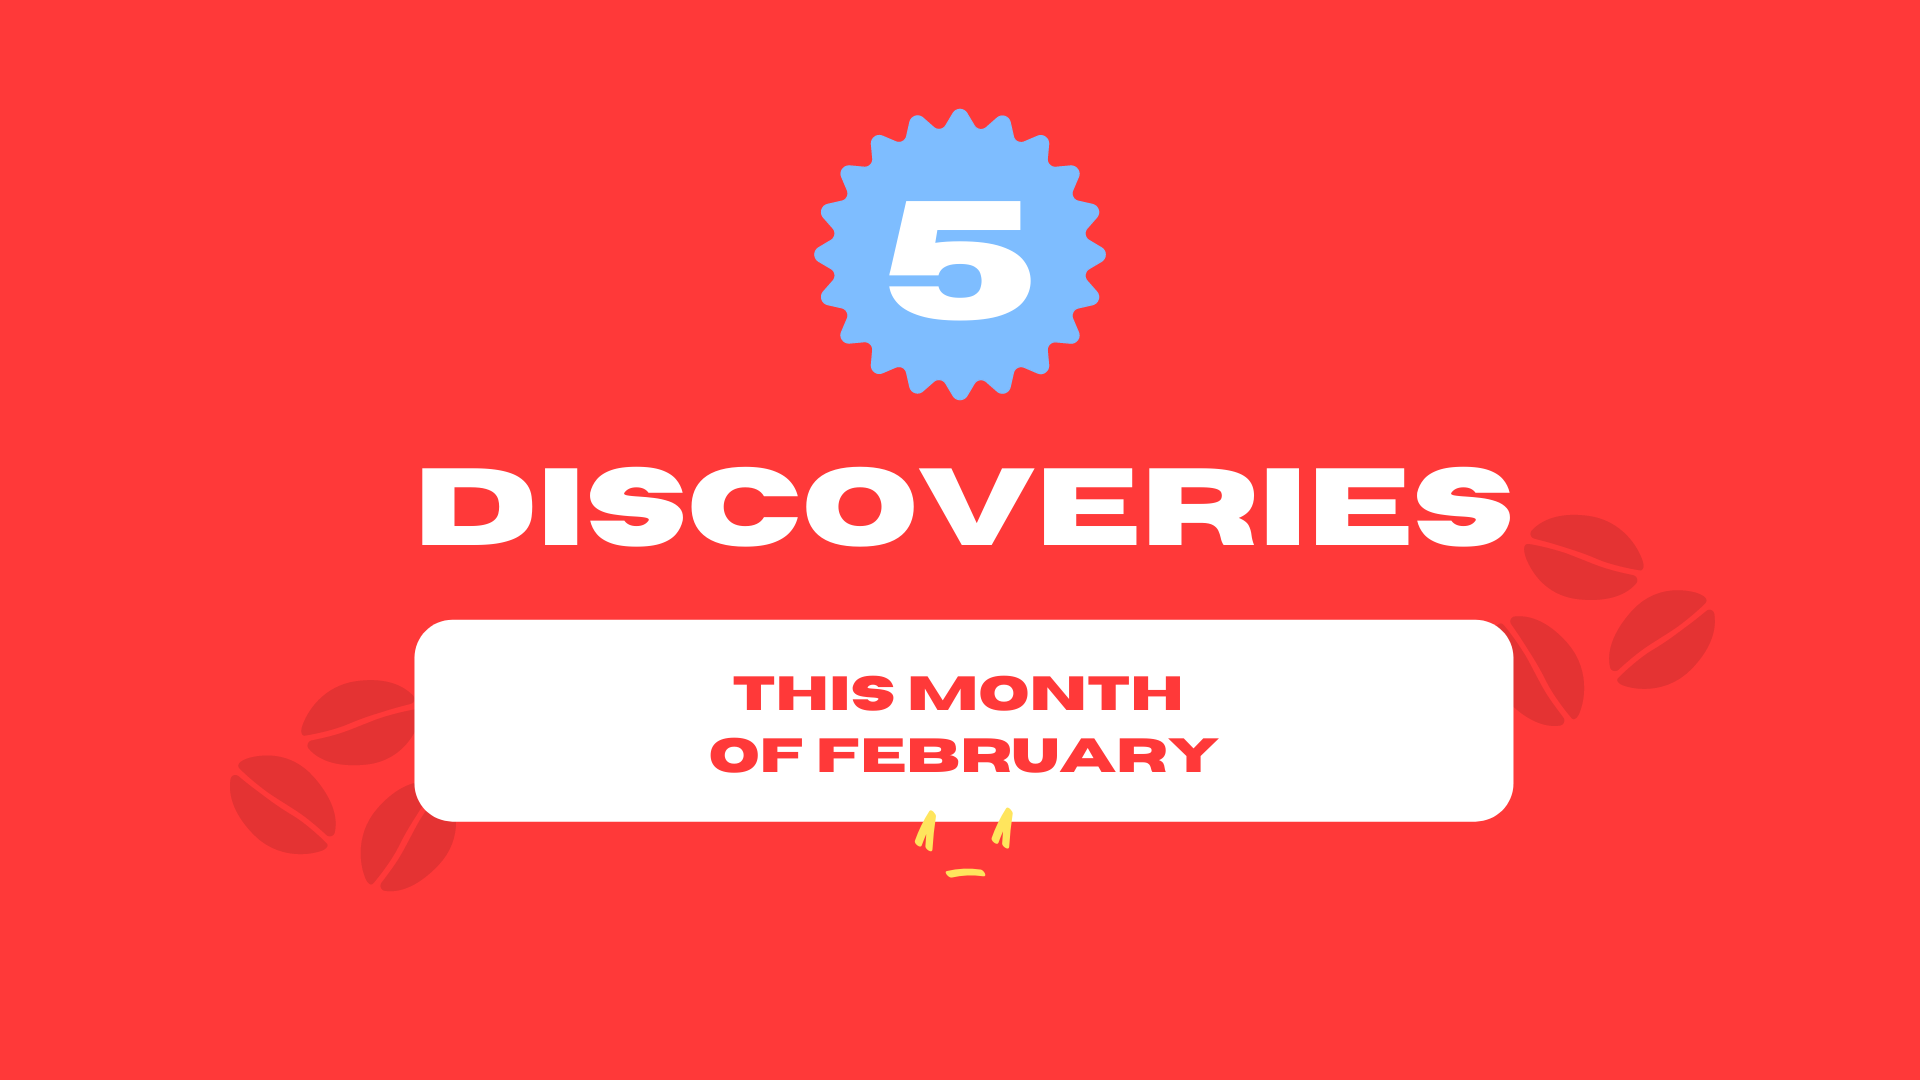 5 Discoveries This Month of February